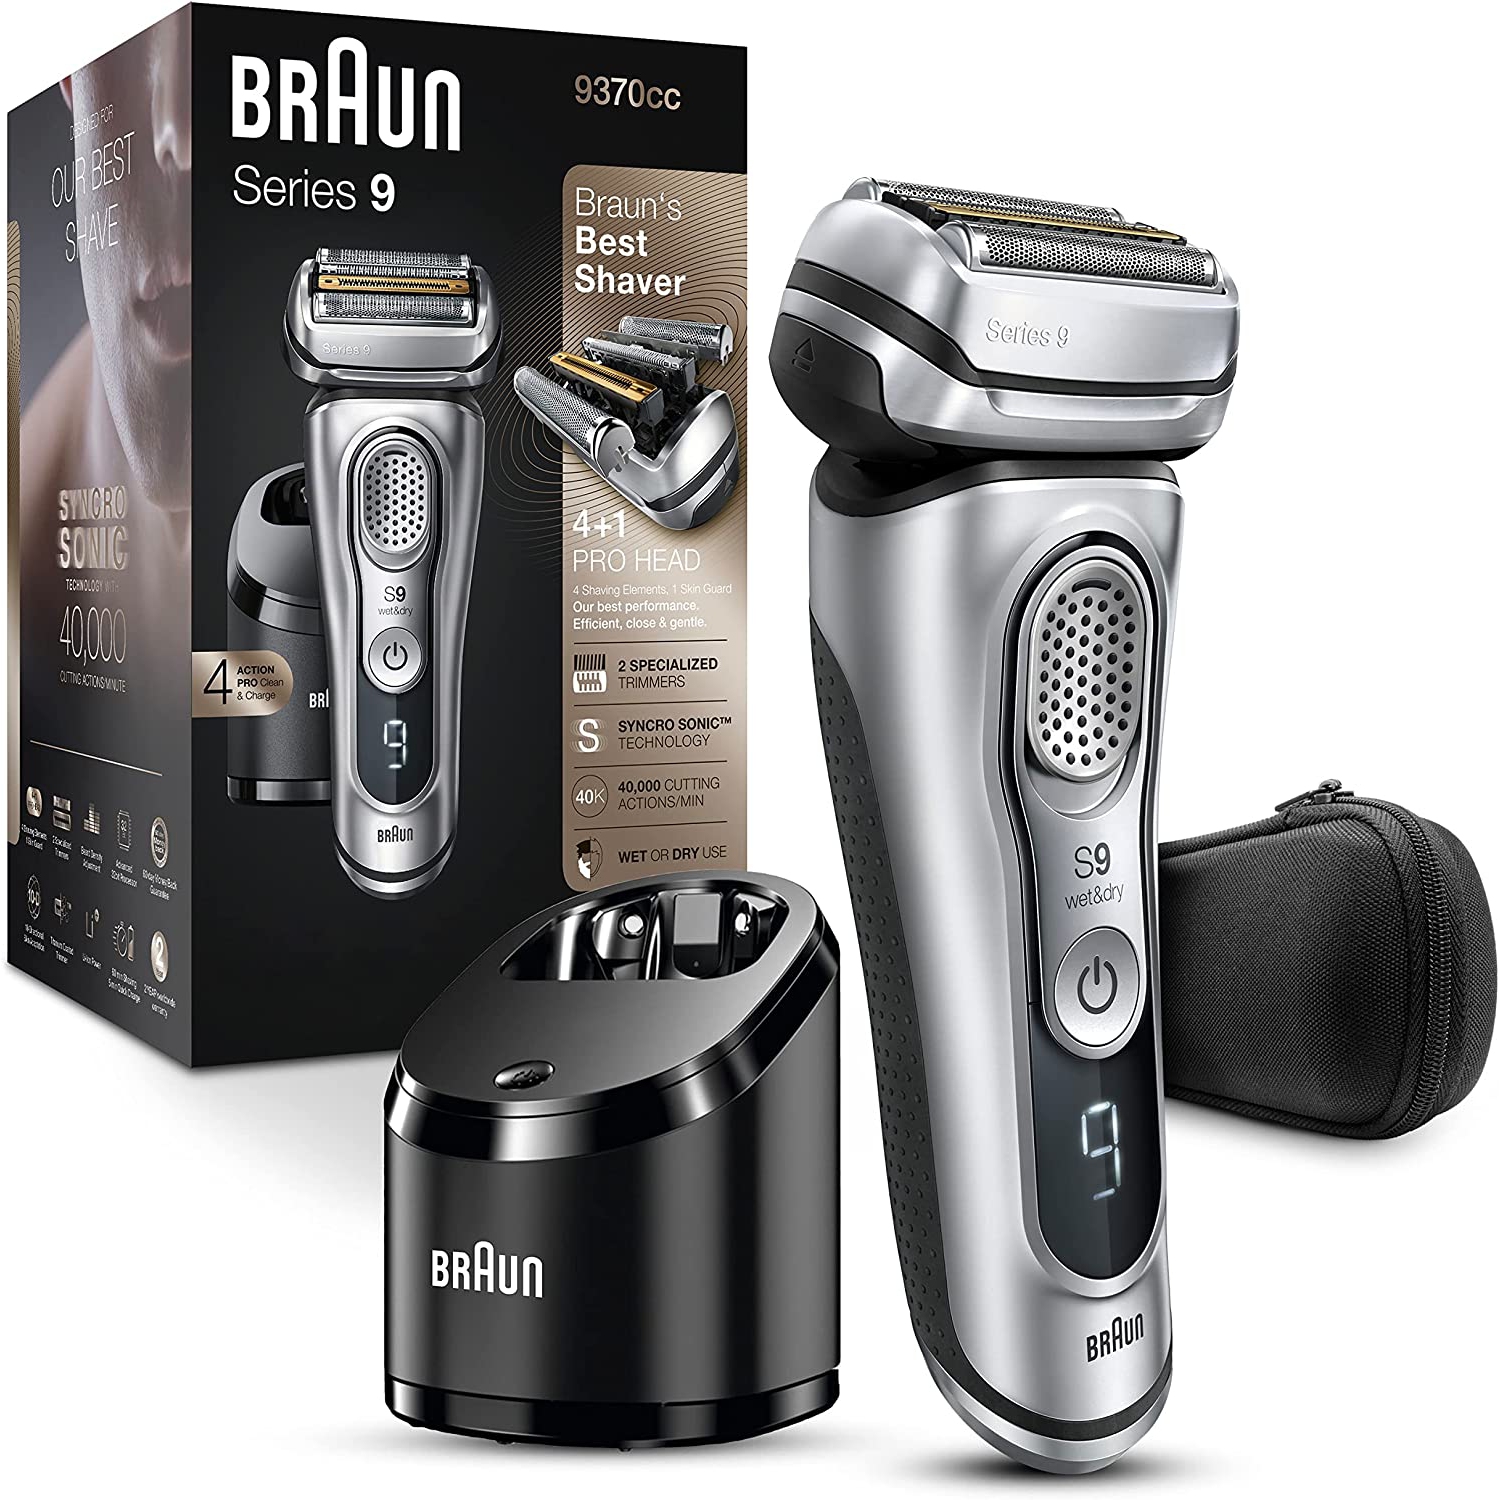 Braun Series 9370CC Men's Electric Foil Shaver /Razor, Wet & Dry, Travel Case with Clean & Charge System